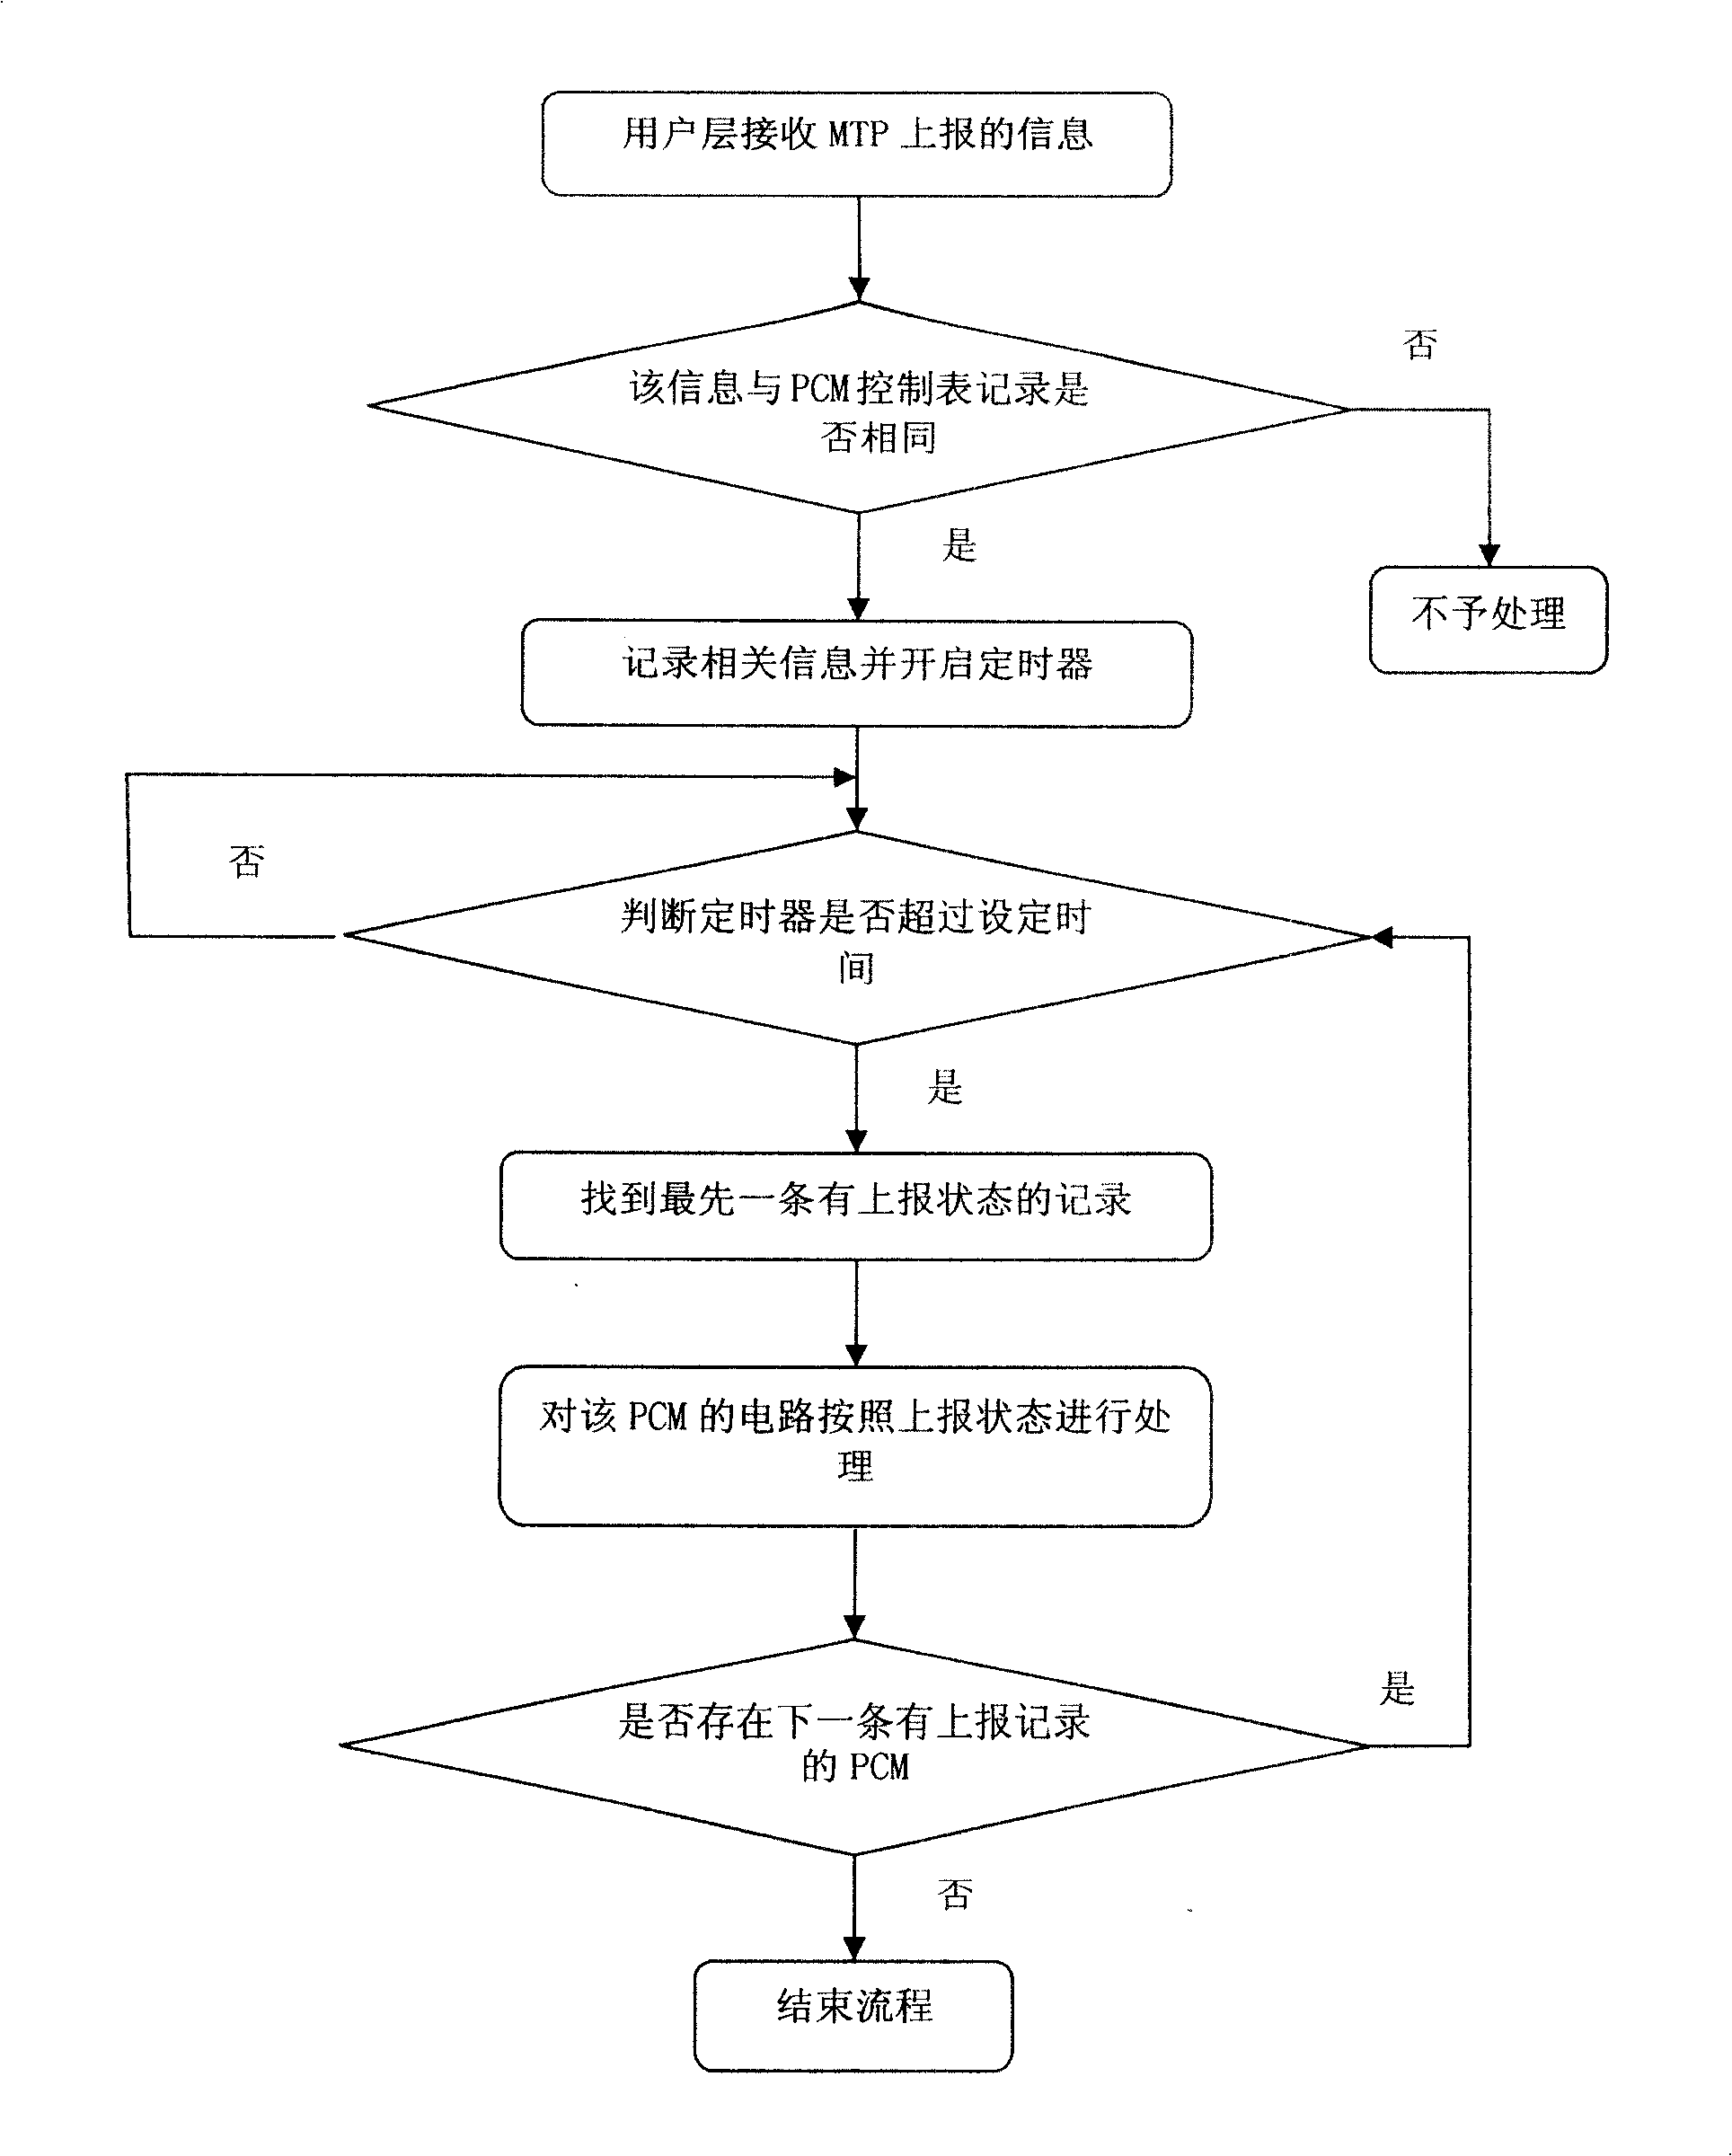 A time-sharing processing method for signaling point reporting flow